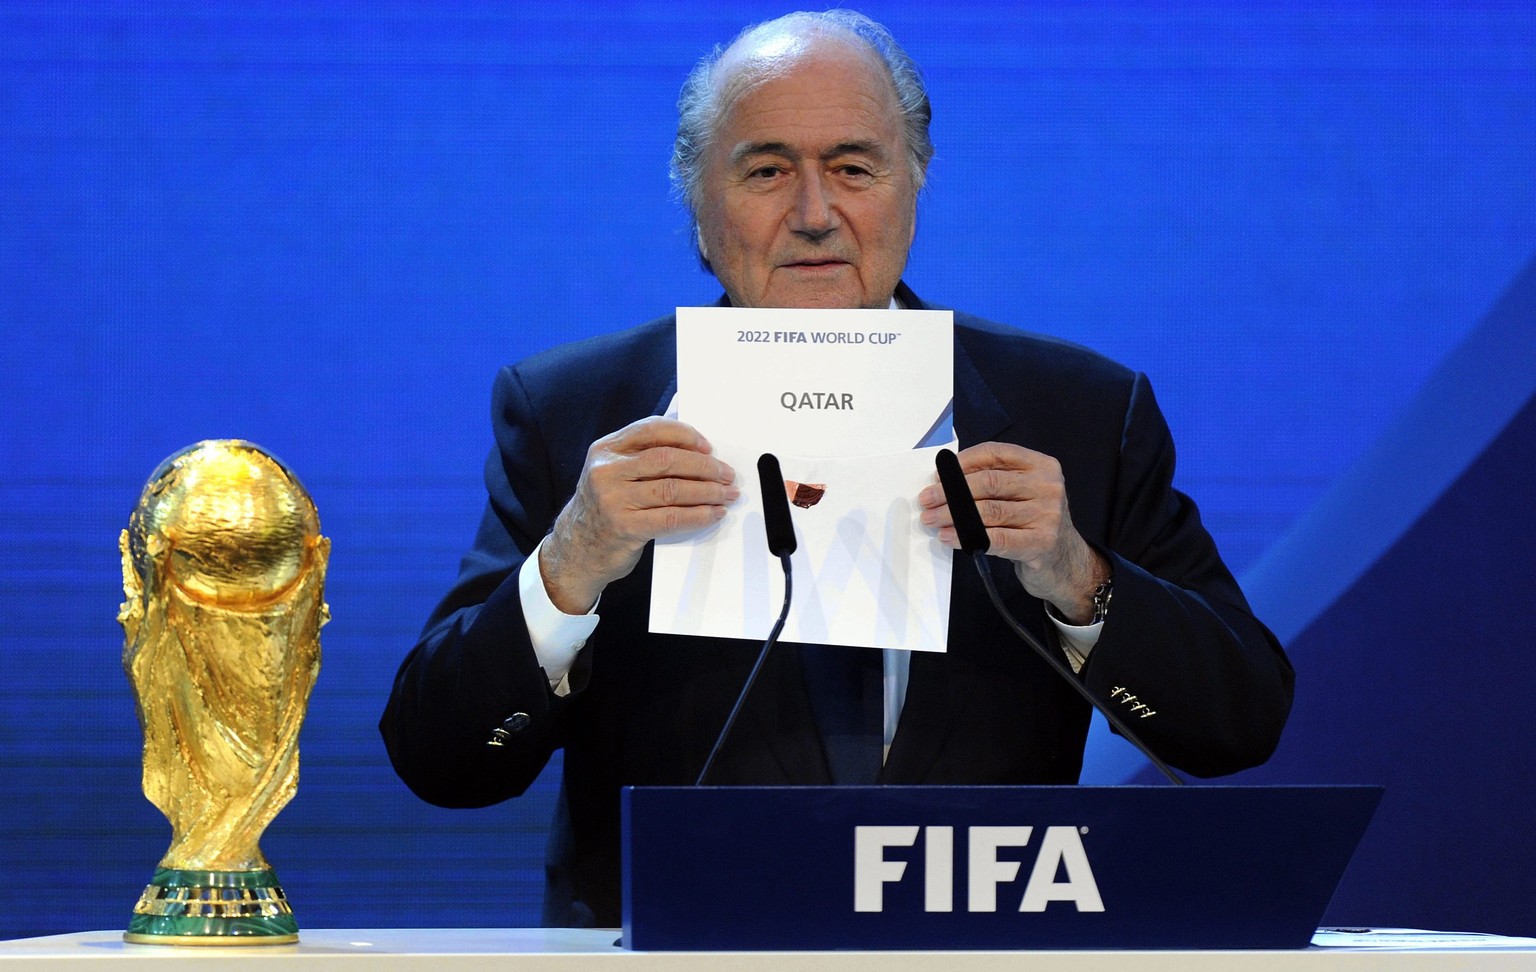 FILE - In this Thursday, Dec. 2, 2010 file photo FIFA President Sepp Blatter announces that Qatar will be hosting the 2022 Soccer World Cup,, during the FIFA 2018 and 2022 World Cup Bid Announcement i ...